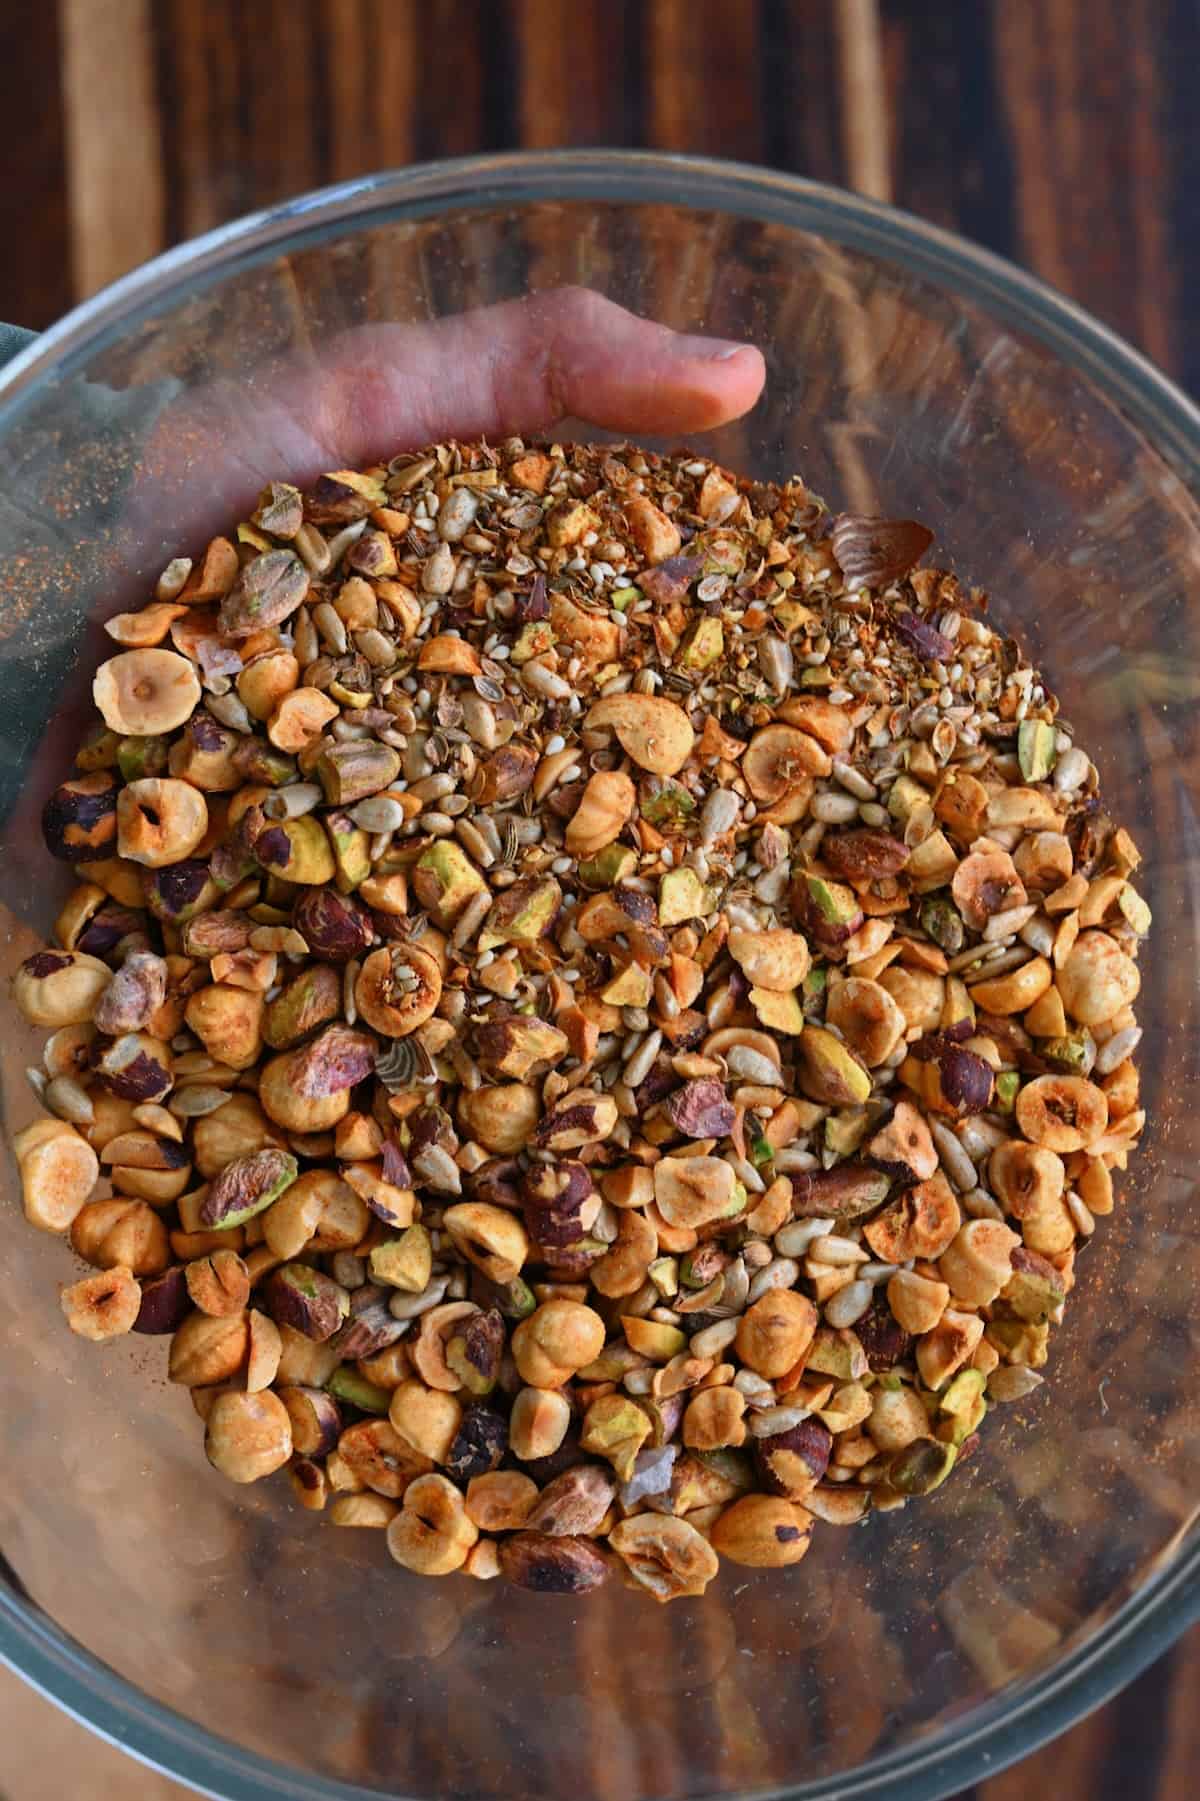 A bowl filled with homemade dukkah spice